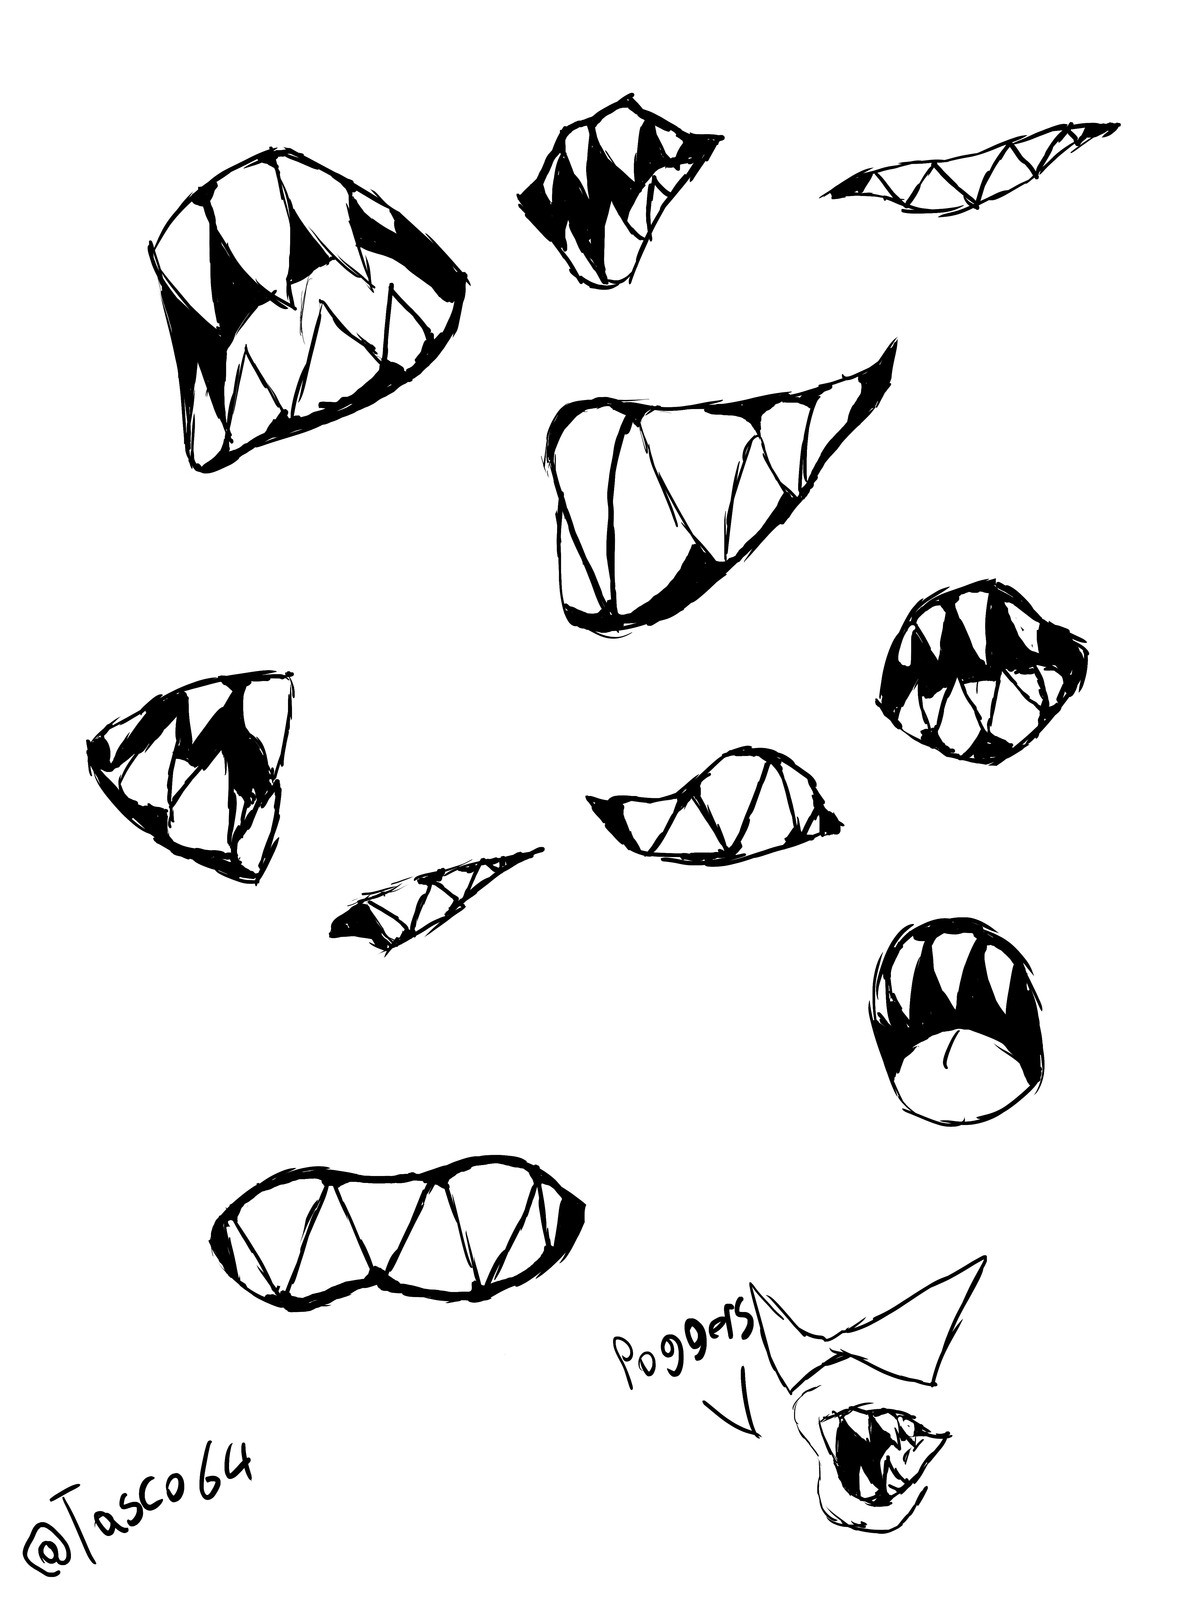 DailyDrawing day 148 mouth practice. Y’know what. It doesn’t matter if I never make it as an artist or if I ever get any better than I am right now. If what I d